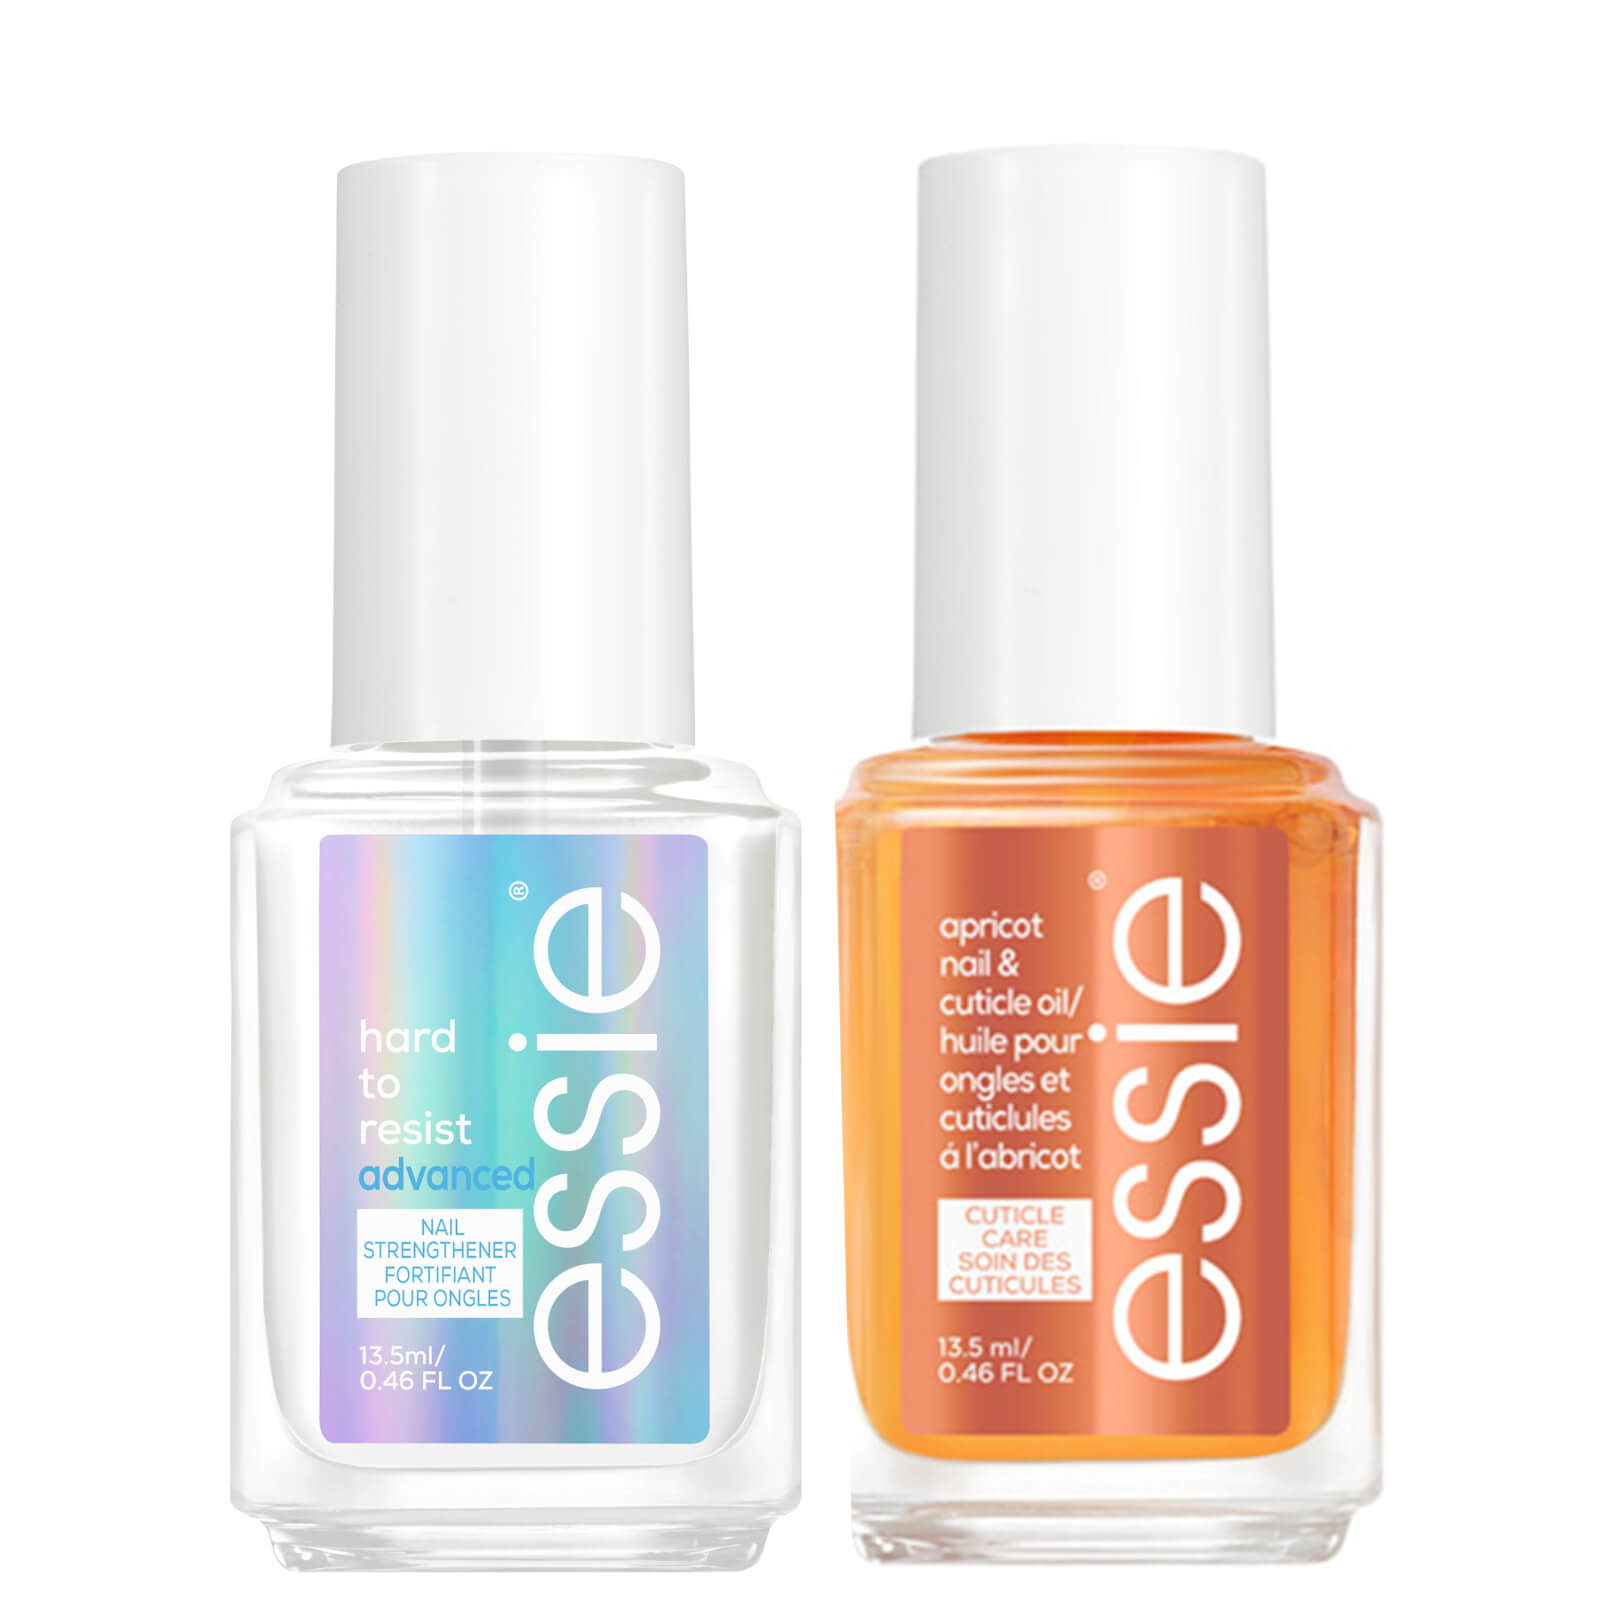 Essie Nail Care Hard To Resist Advanced And Cuticle Oil Apricot Treatment Duo Kit In White